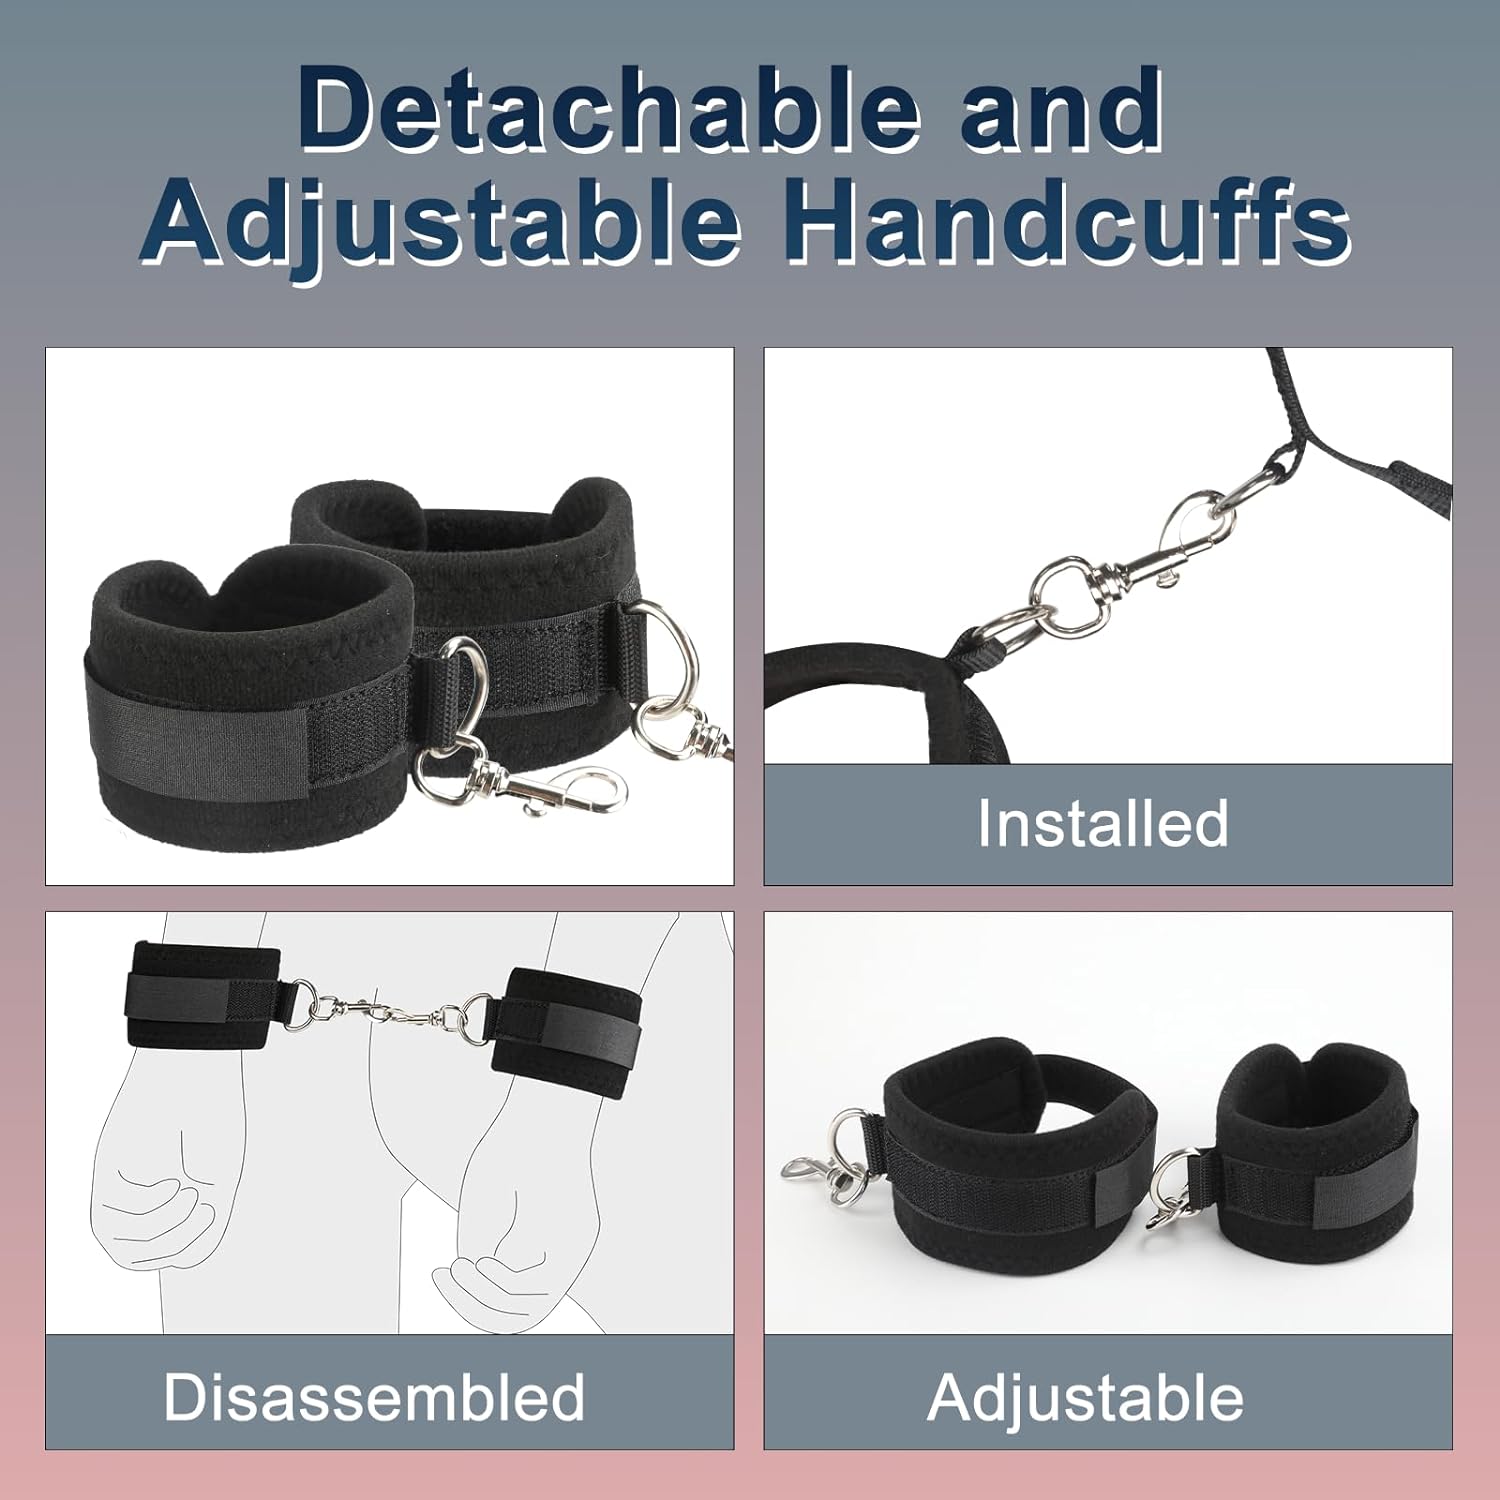 Open Wide Padded Adjustable Thigh Sling Position Aid & Demountable Handcuffs